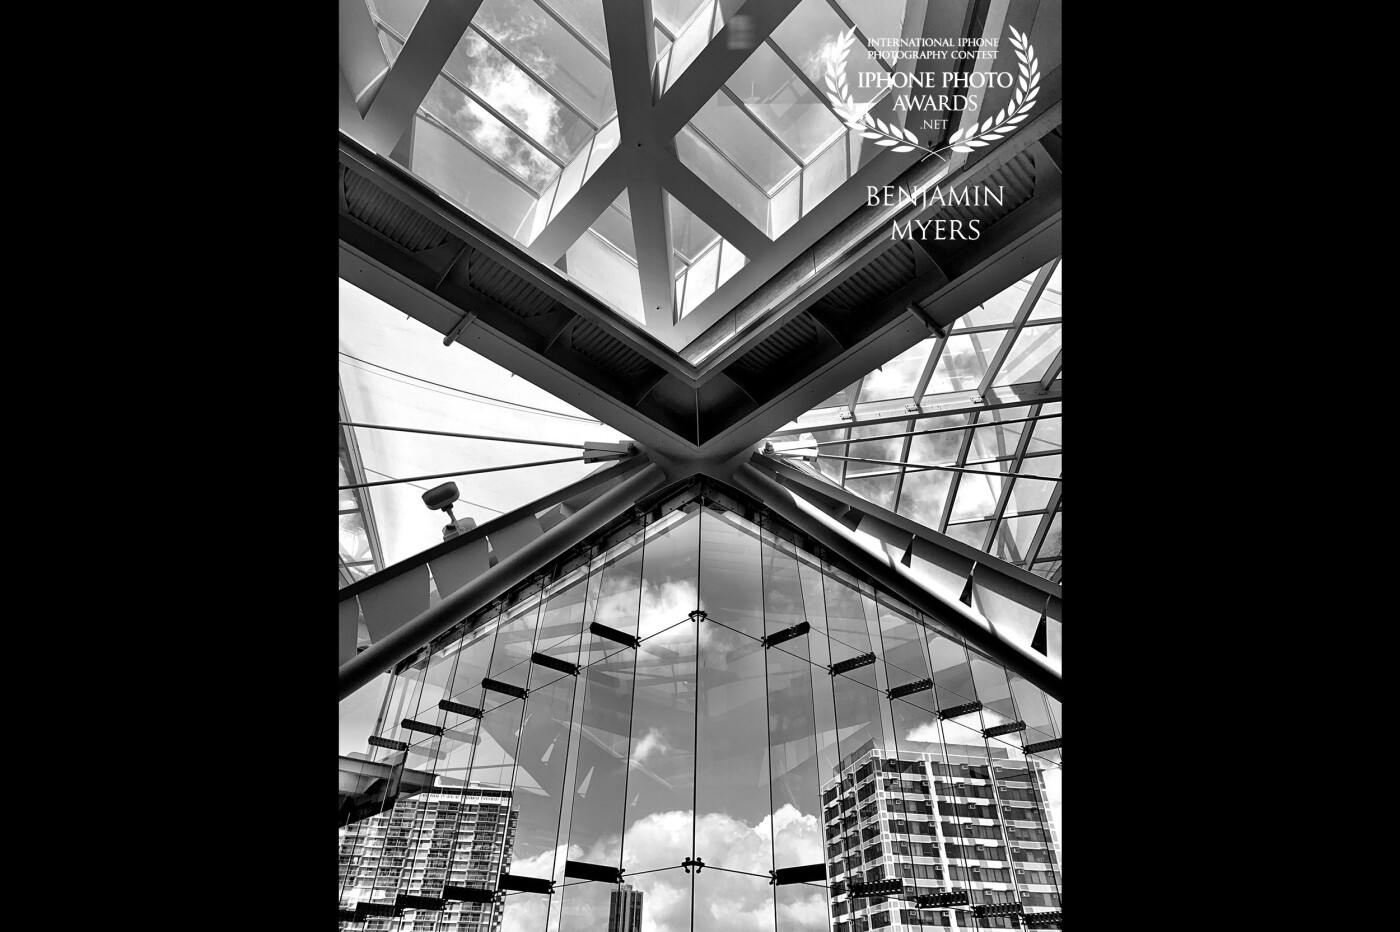 I was at the Honolulu Convention Center when I took this shot. The architecture caught my eye and I stopped to admire it for a bit. It really came alive in black and white. 